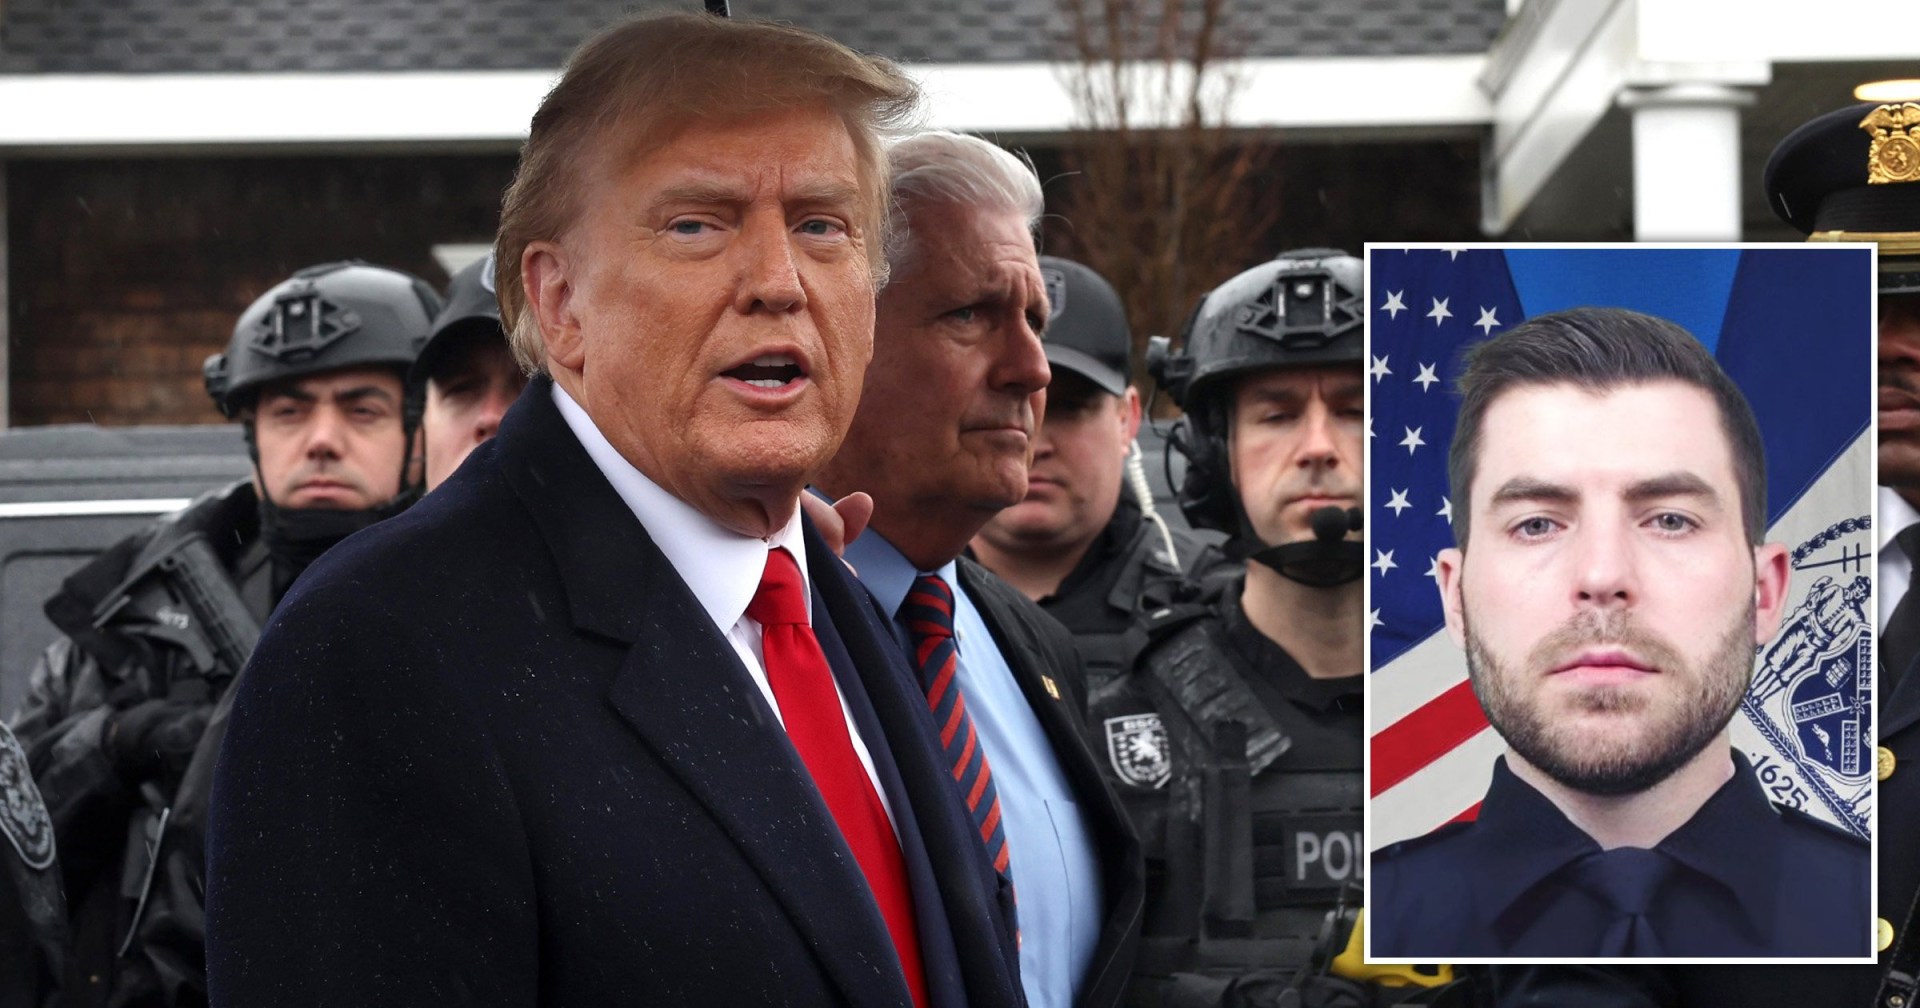 donald trump calls for 'law and order' after attending slain cop's wake